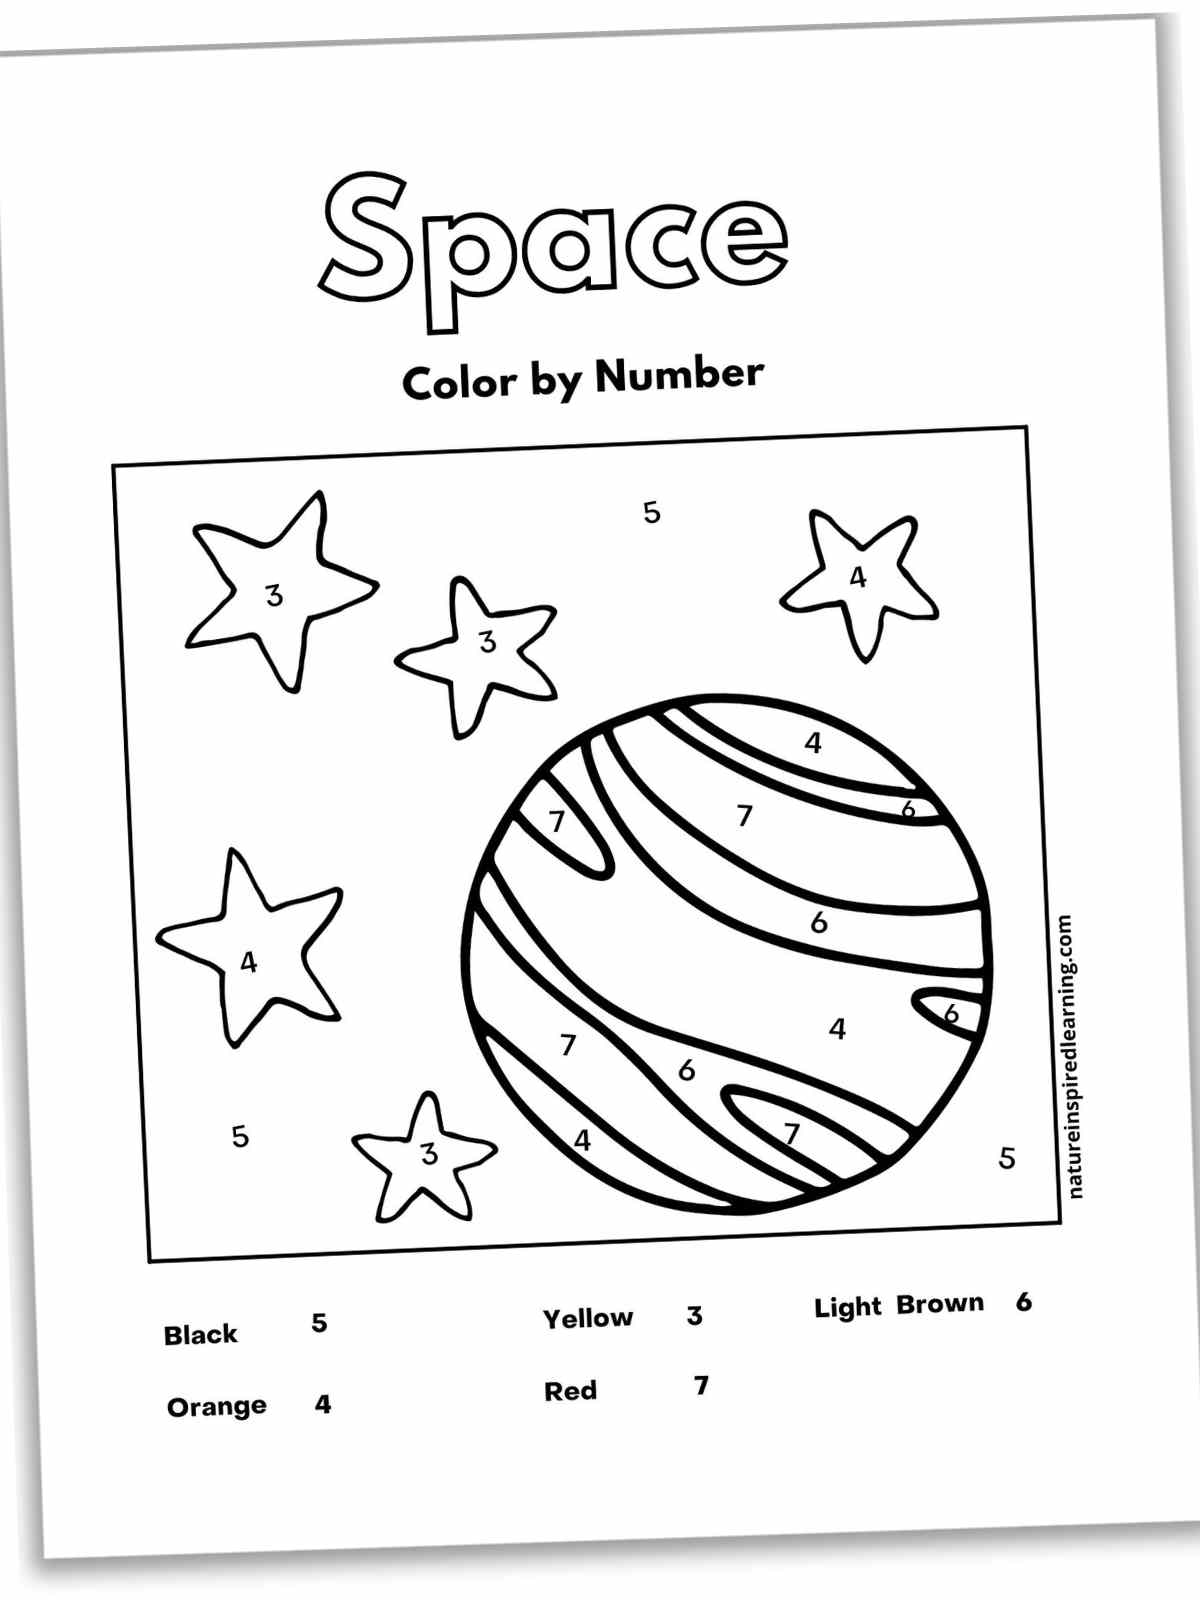 Black and white color by number with space across the top and the outline of the planet Jupiter and stars. A color key across the bottom.